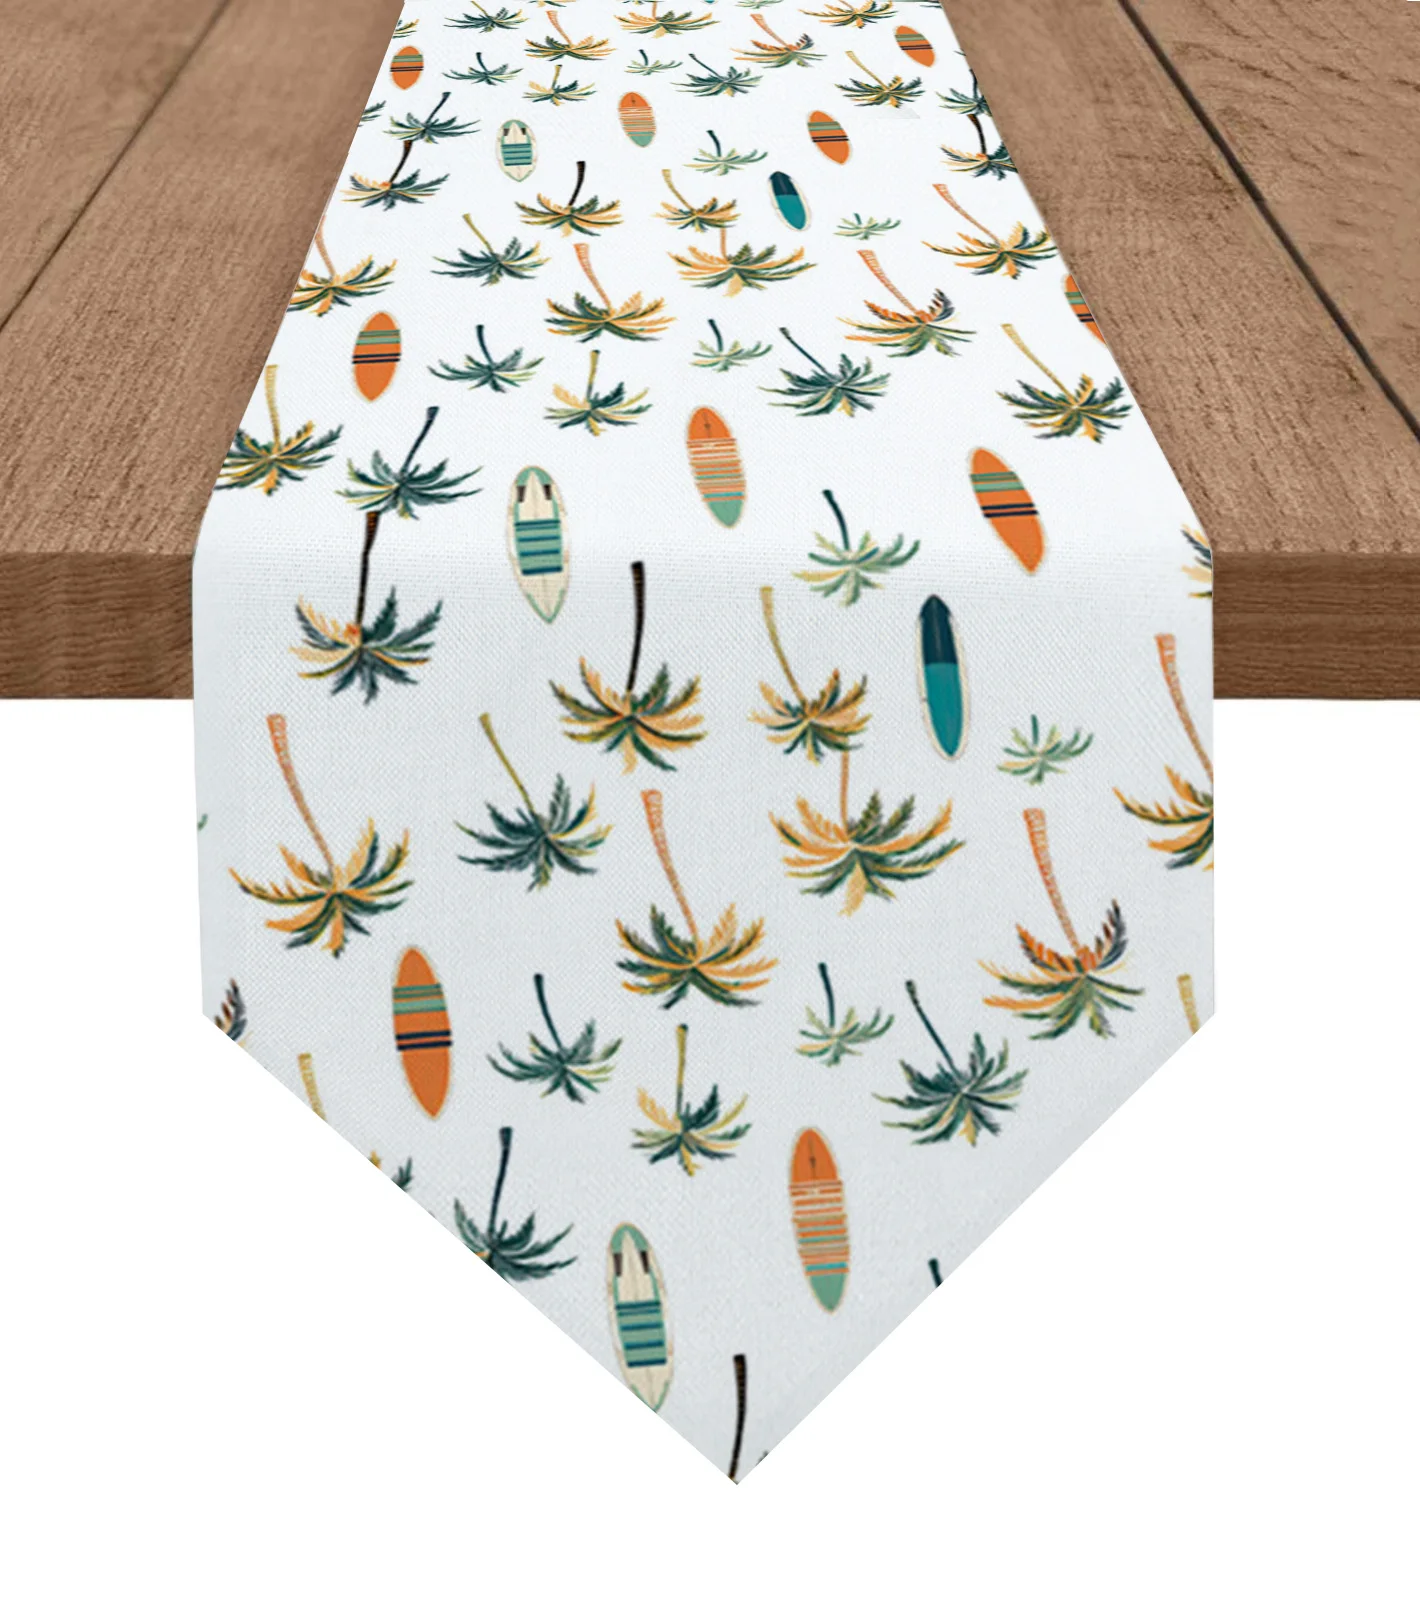 

Palm Trees Surfboards Leaves Table Runner Wedding Decor Tablecloth Holiday Party Home Dining Table Decoration